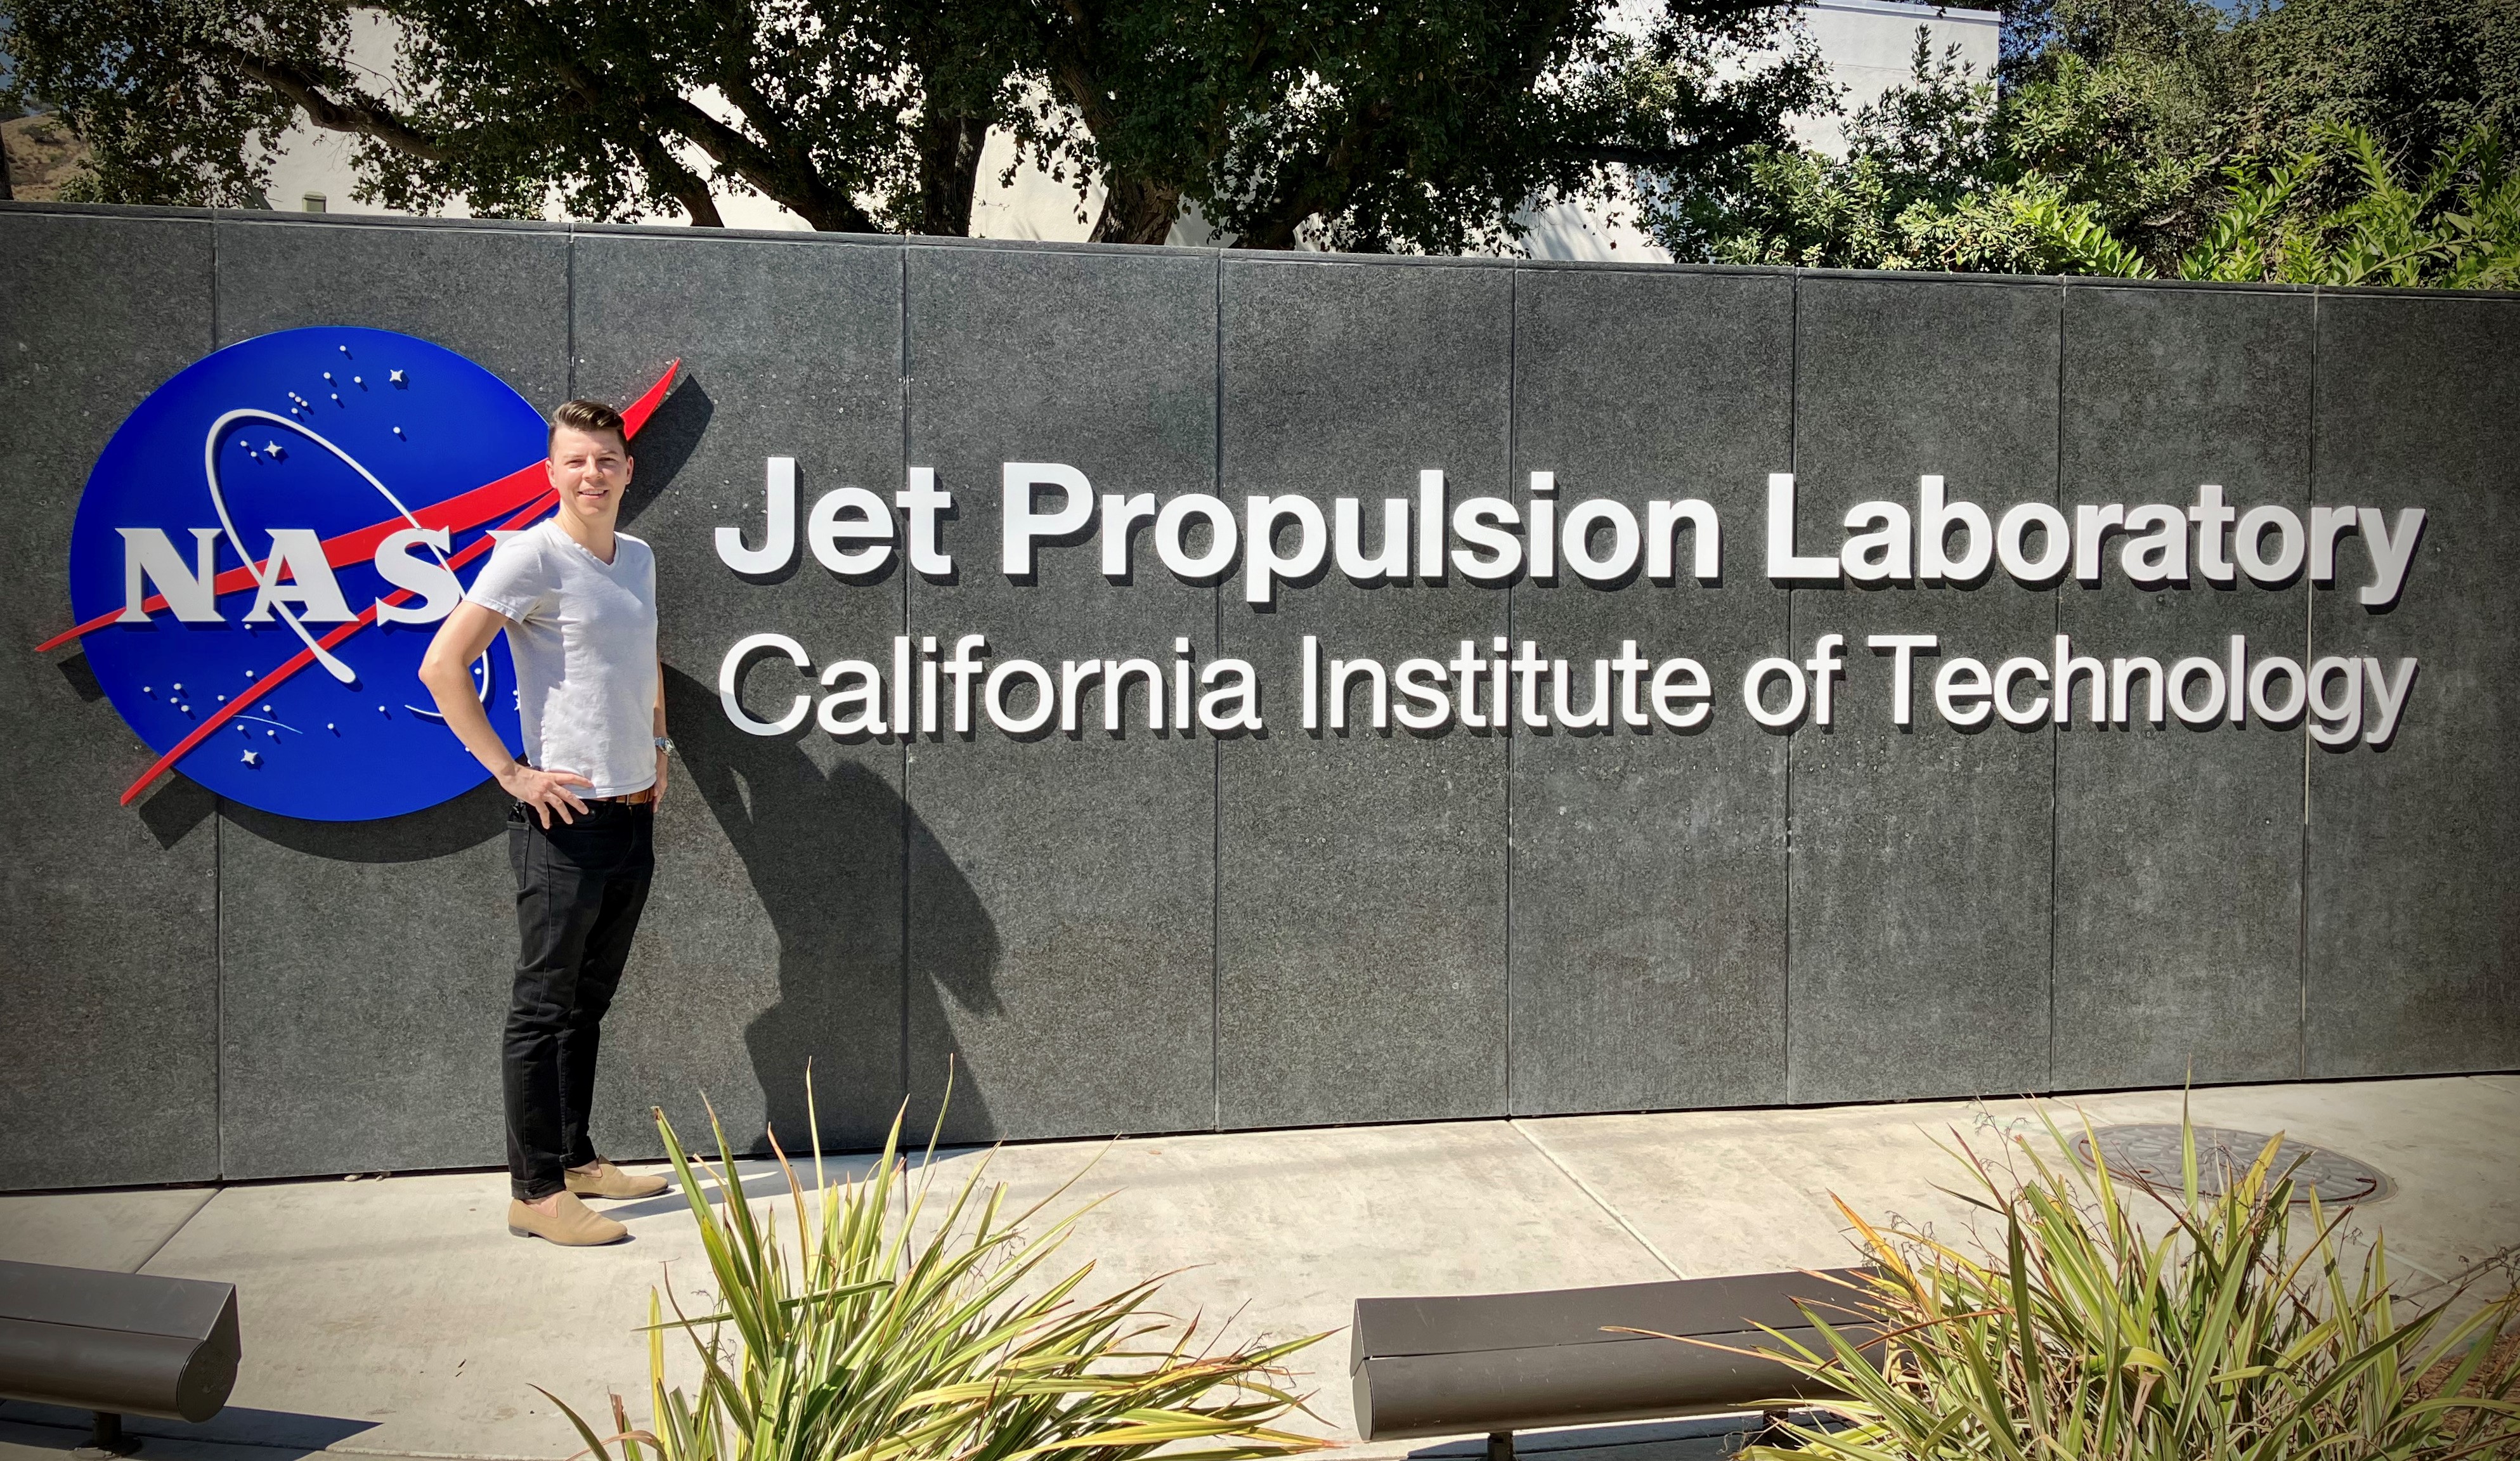 Matthäus Kiel stands in front of the big sign outside the JPL gates that says "Jet Propulsion Laboratory" next to the NASA logo